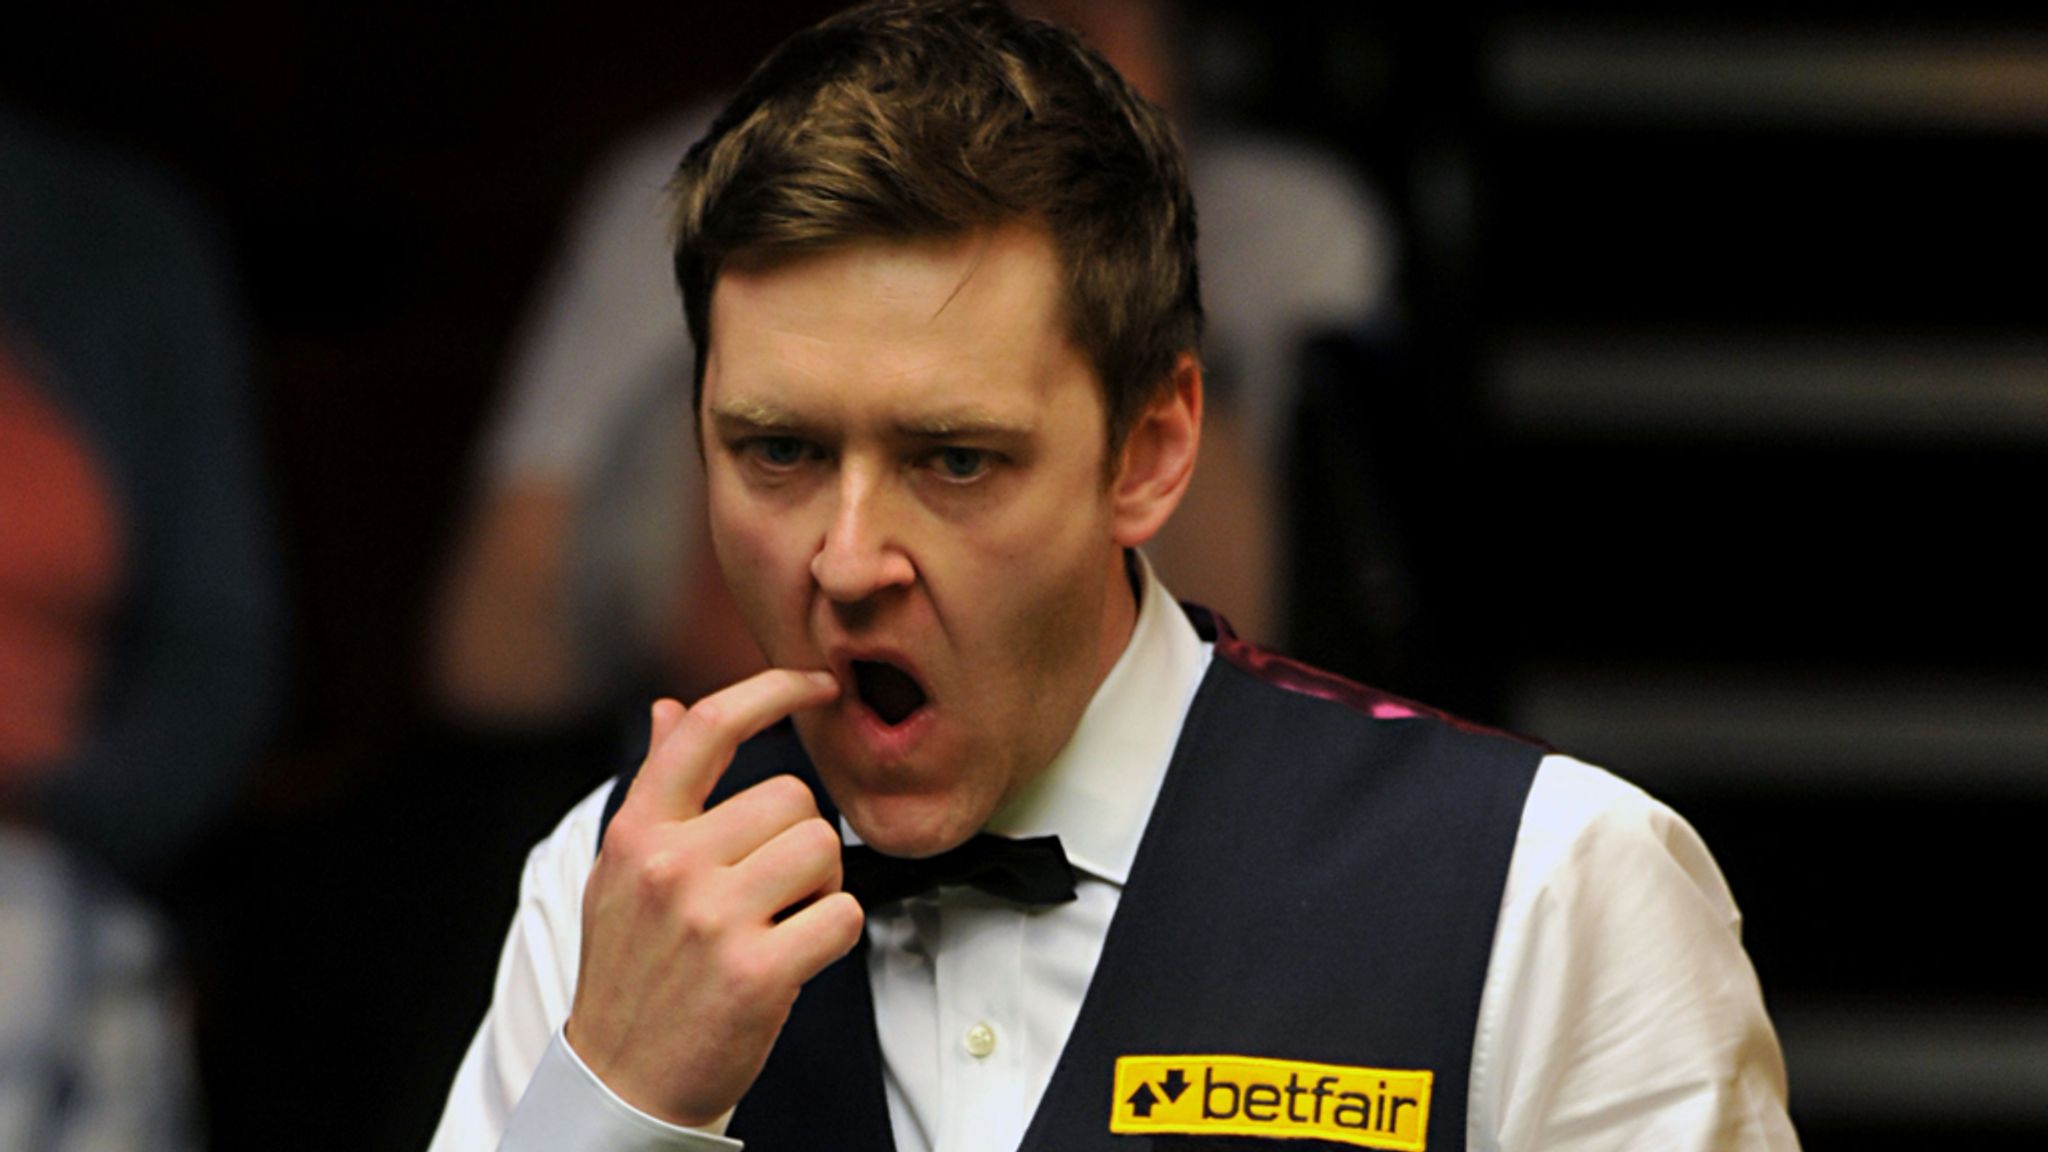 World Snooker Championships Ricky Walden completes 10-1 mauling of Michael Holt Snooker News Sky Sports